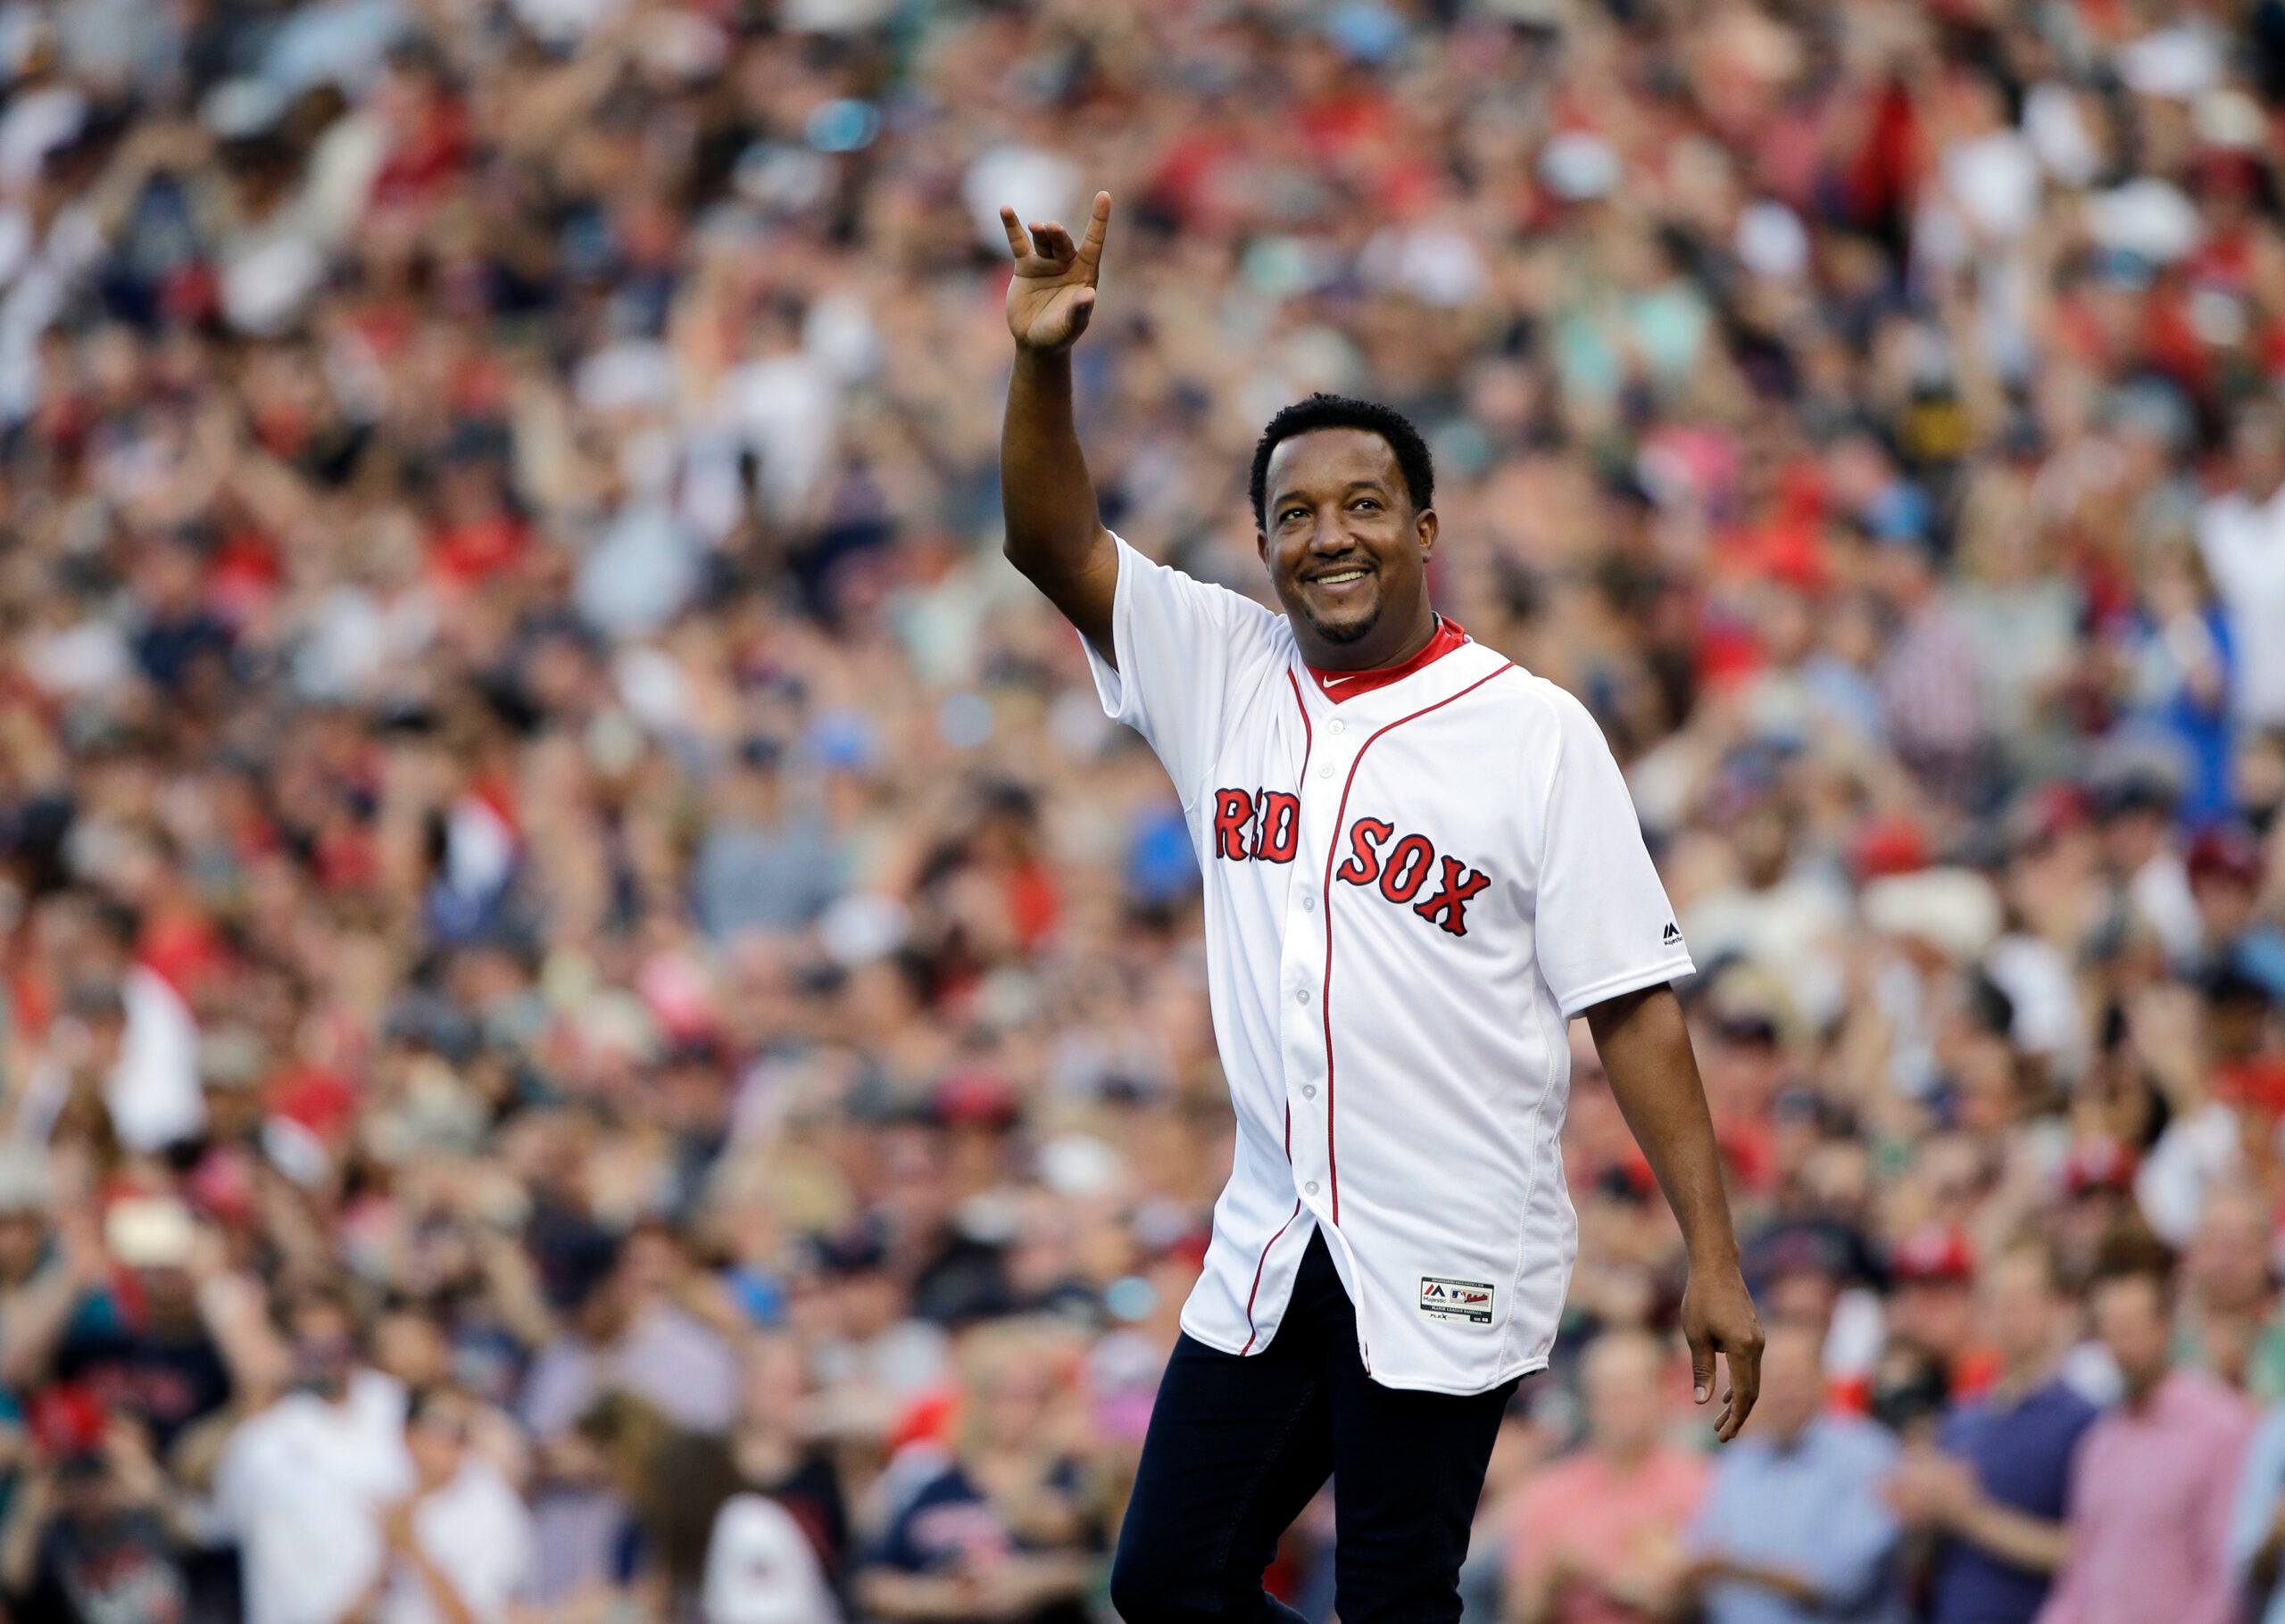 Morning sports update: Pedro Martinez described his hopes for new